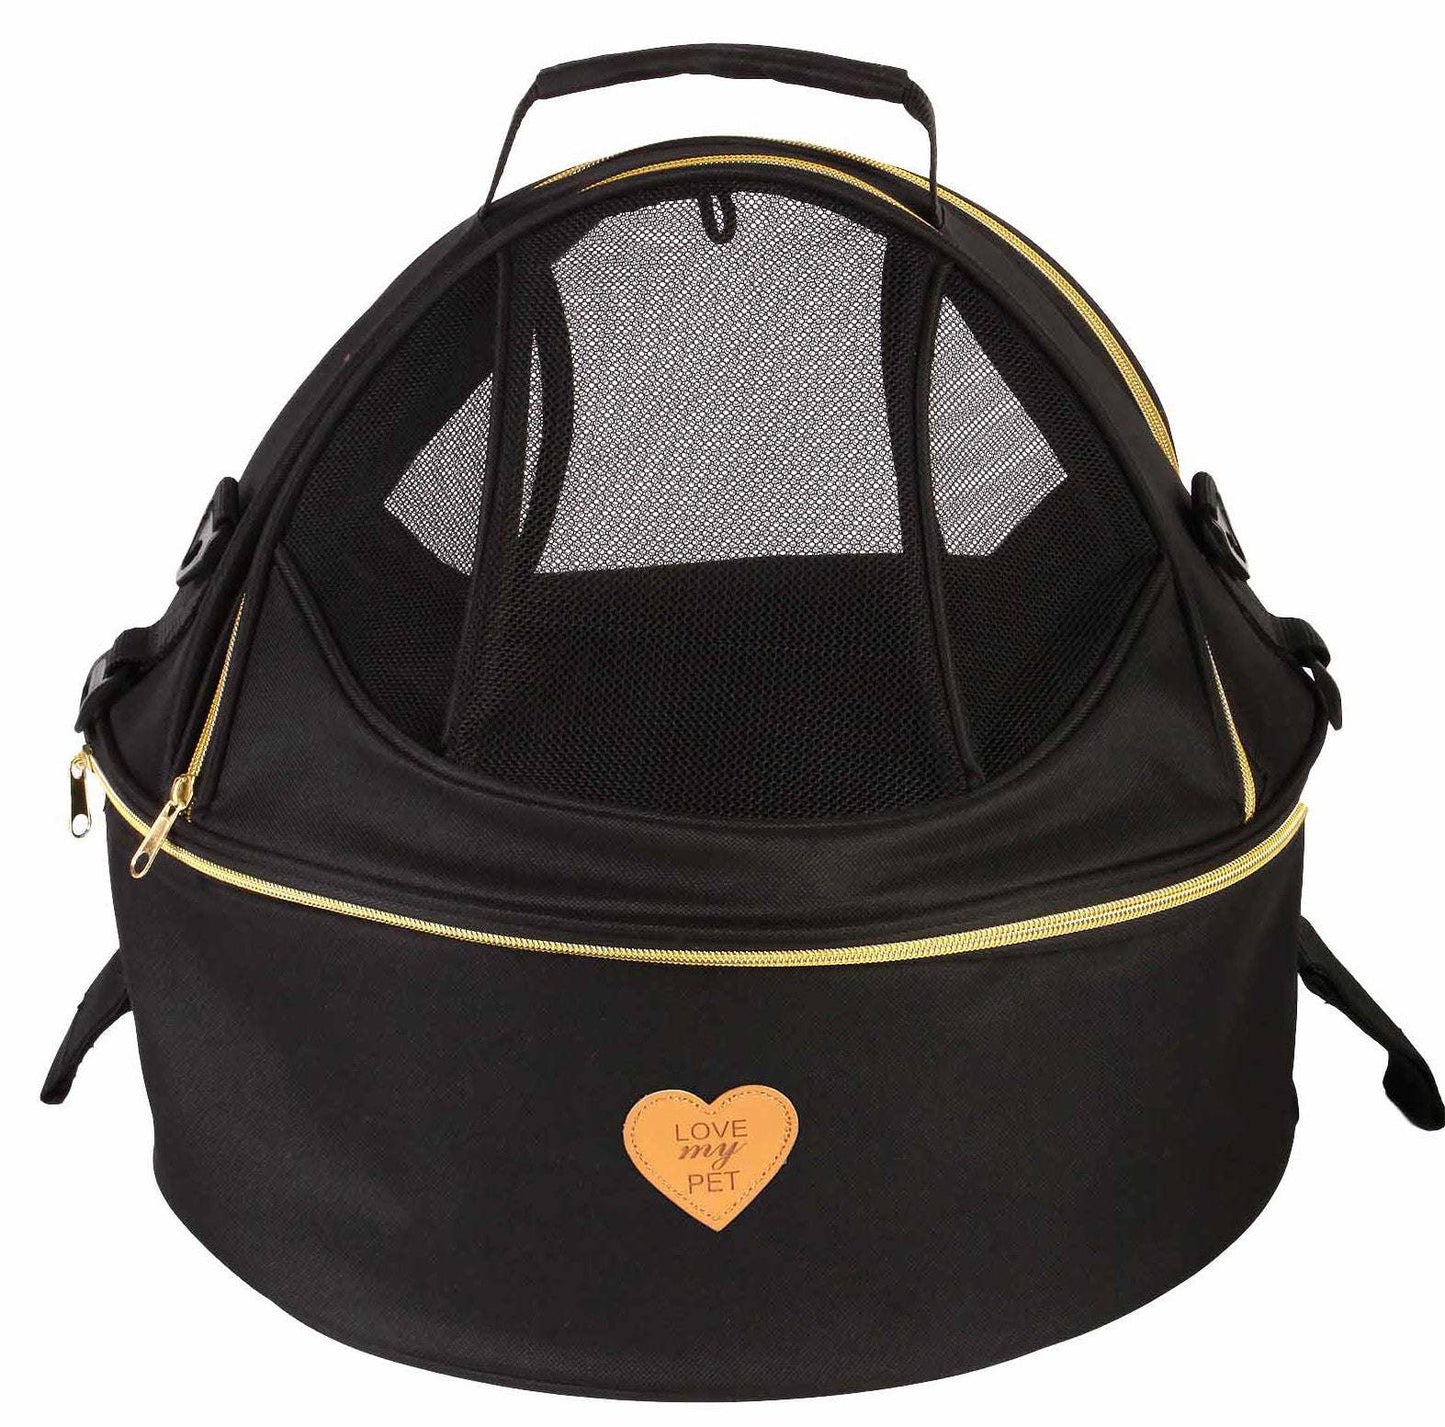 Airline Approved Panoramic Circular Pet Carrier